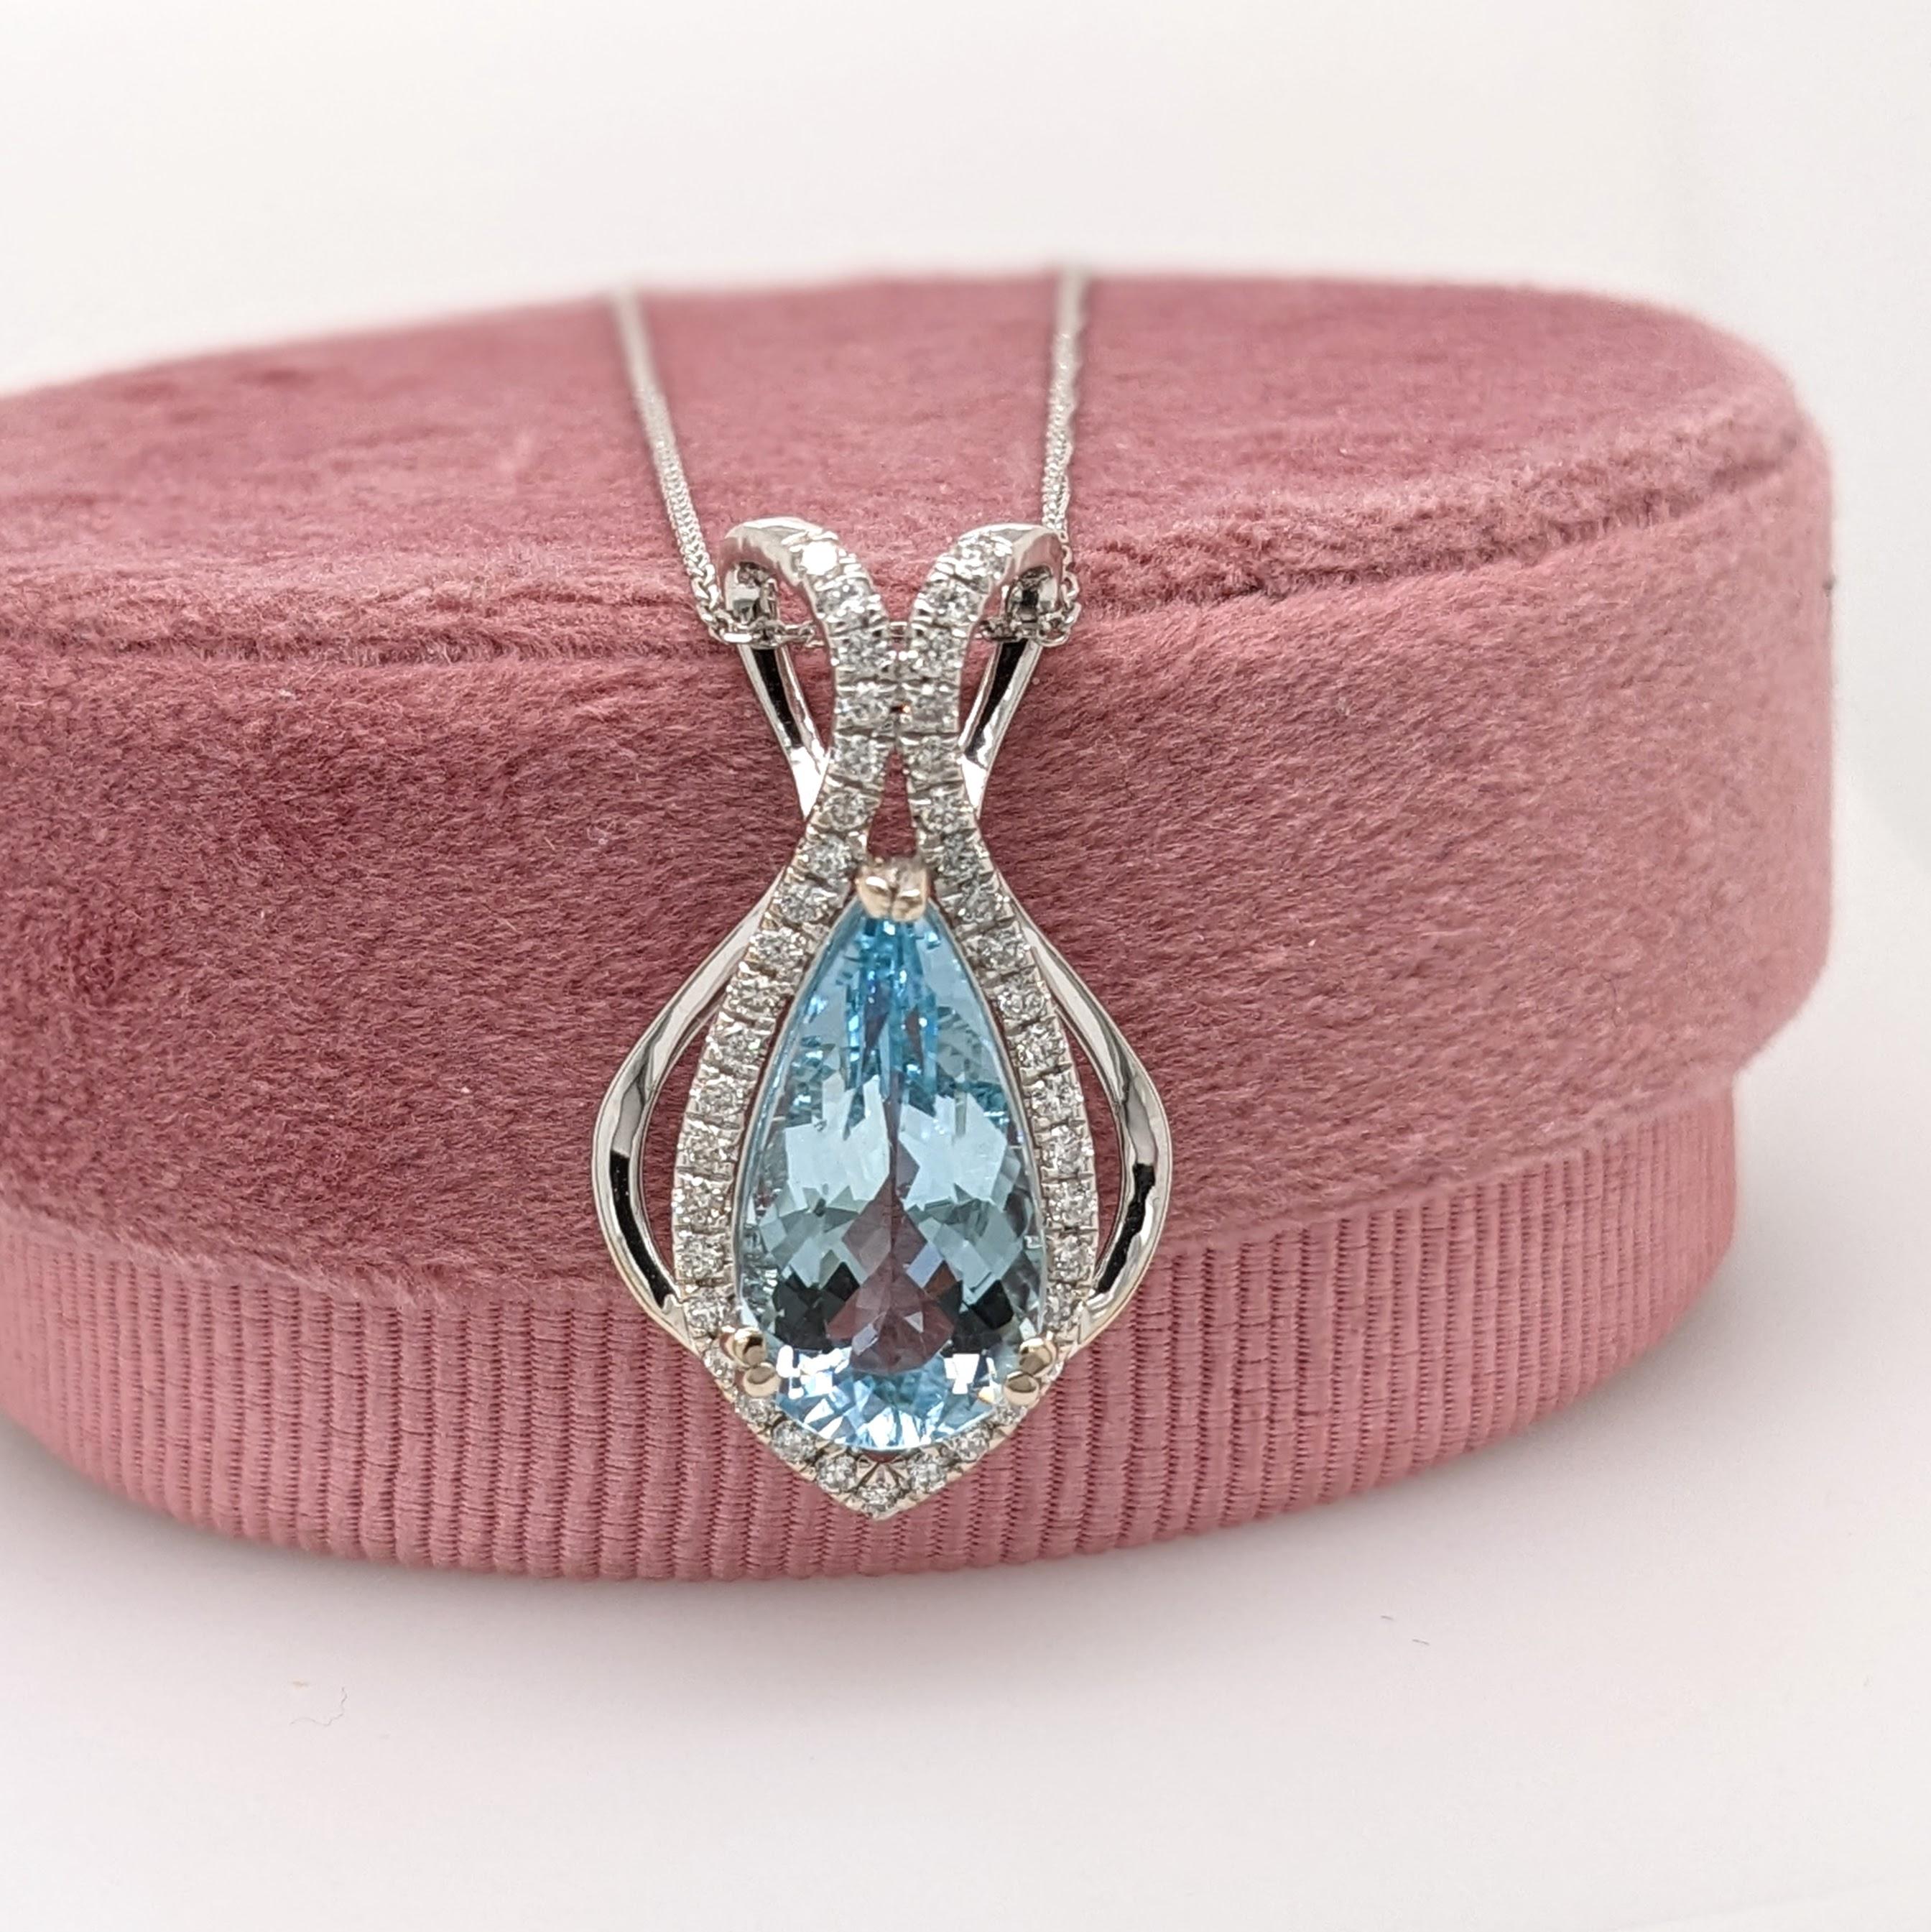 4.11ct Aquamarine Pendant w Diamond Halo in Solid 14k Gold Pear Shape 16x8.5mm For Sale 1